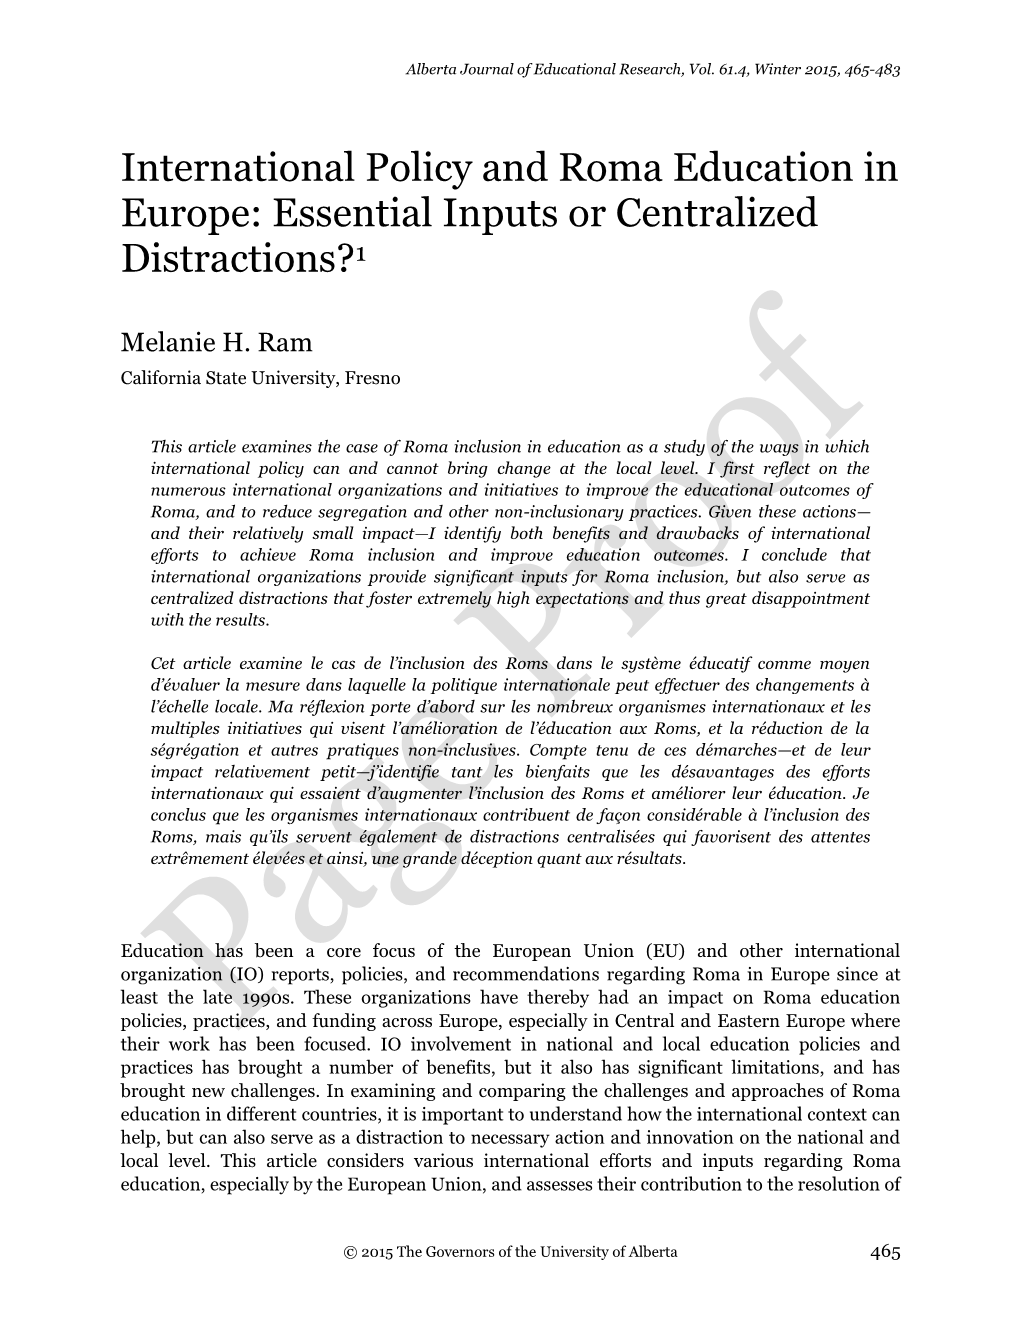 International Policy and Roma Education in Europe: Essential Inputs Or Centralized Distractions?1